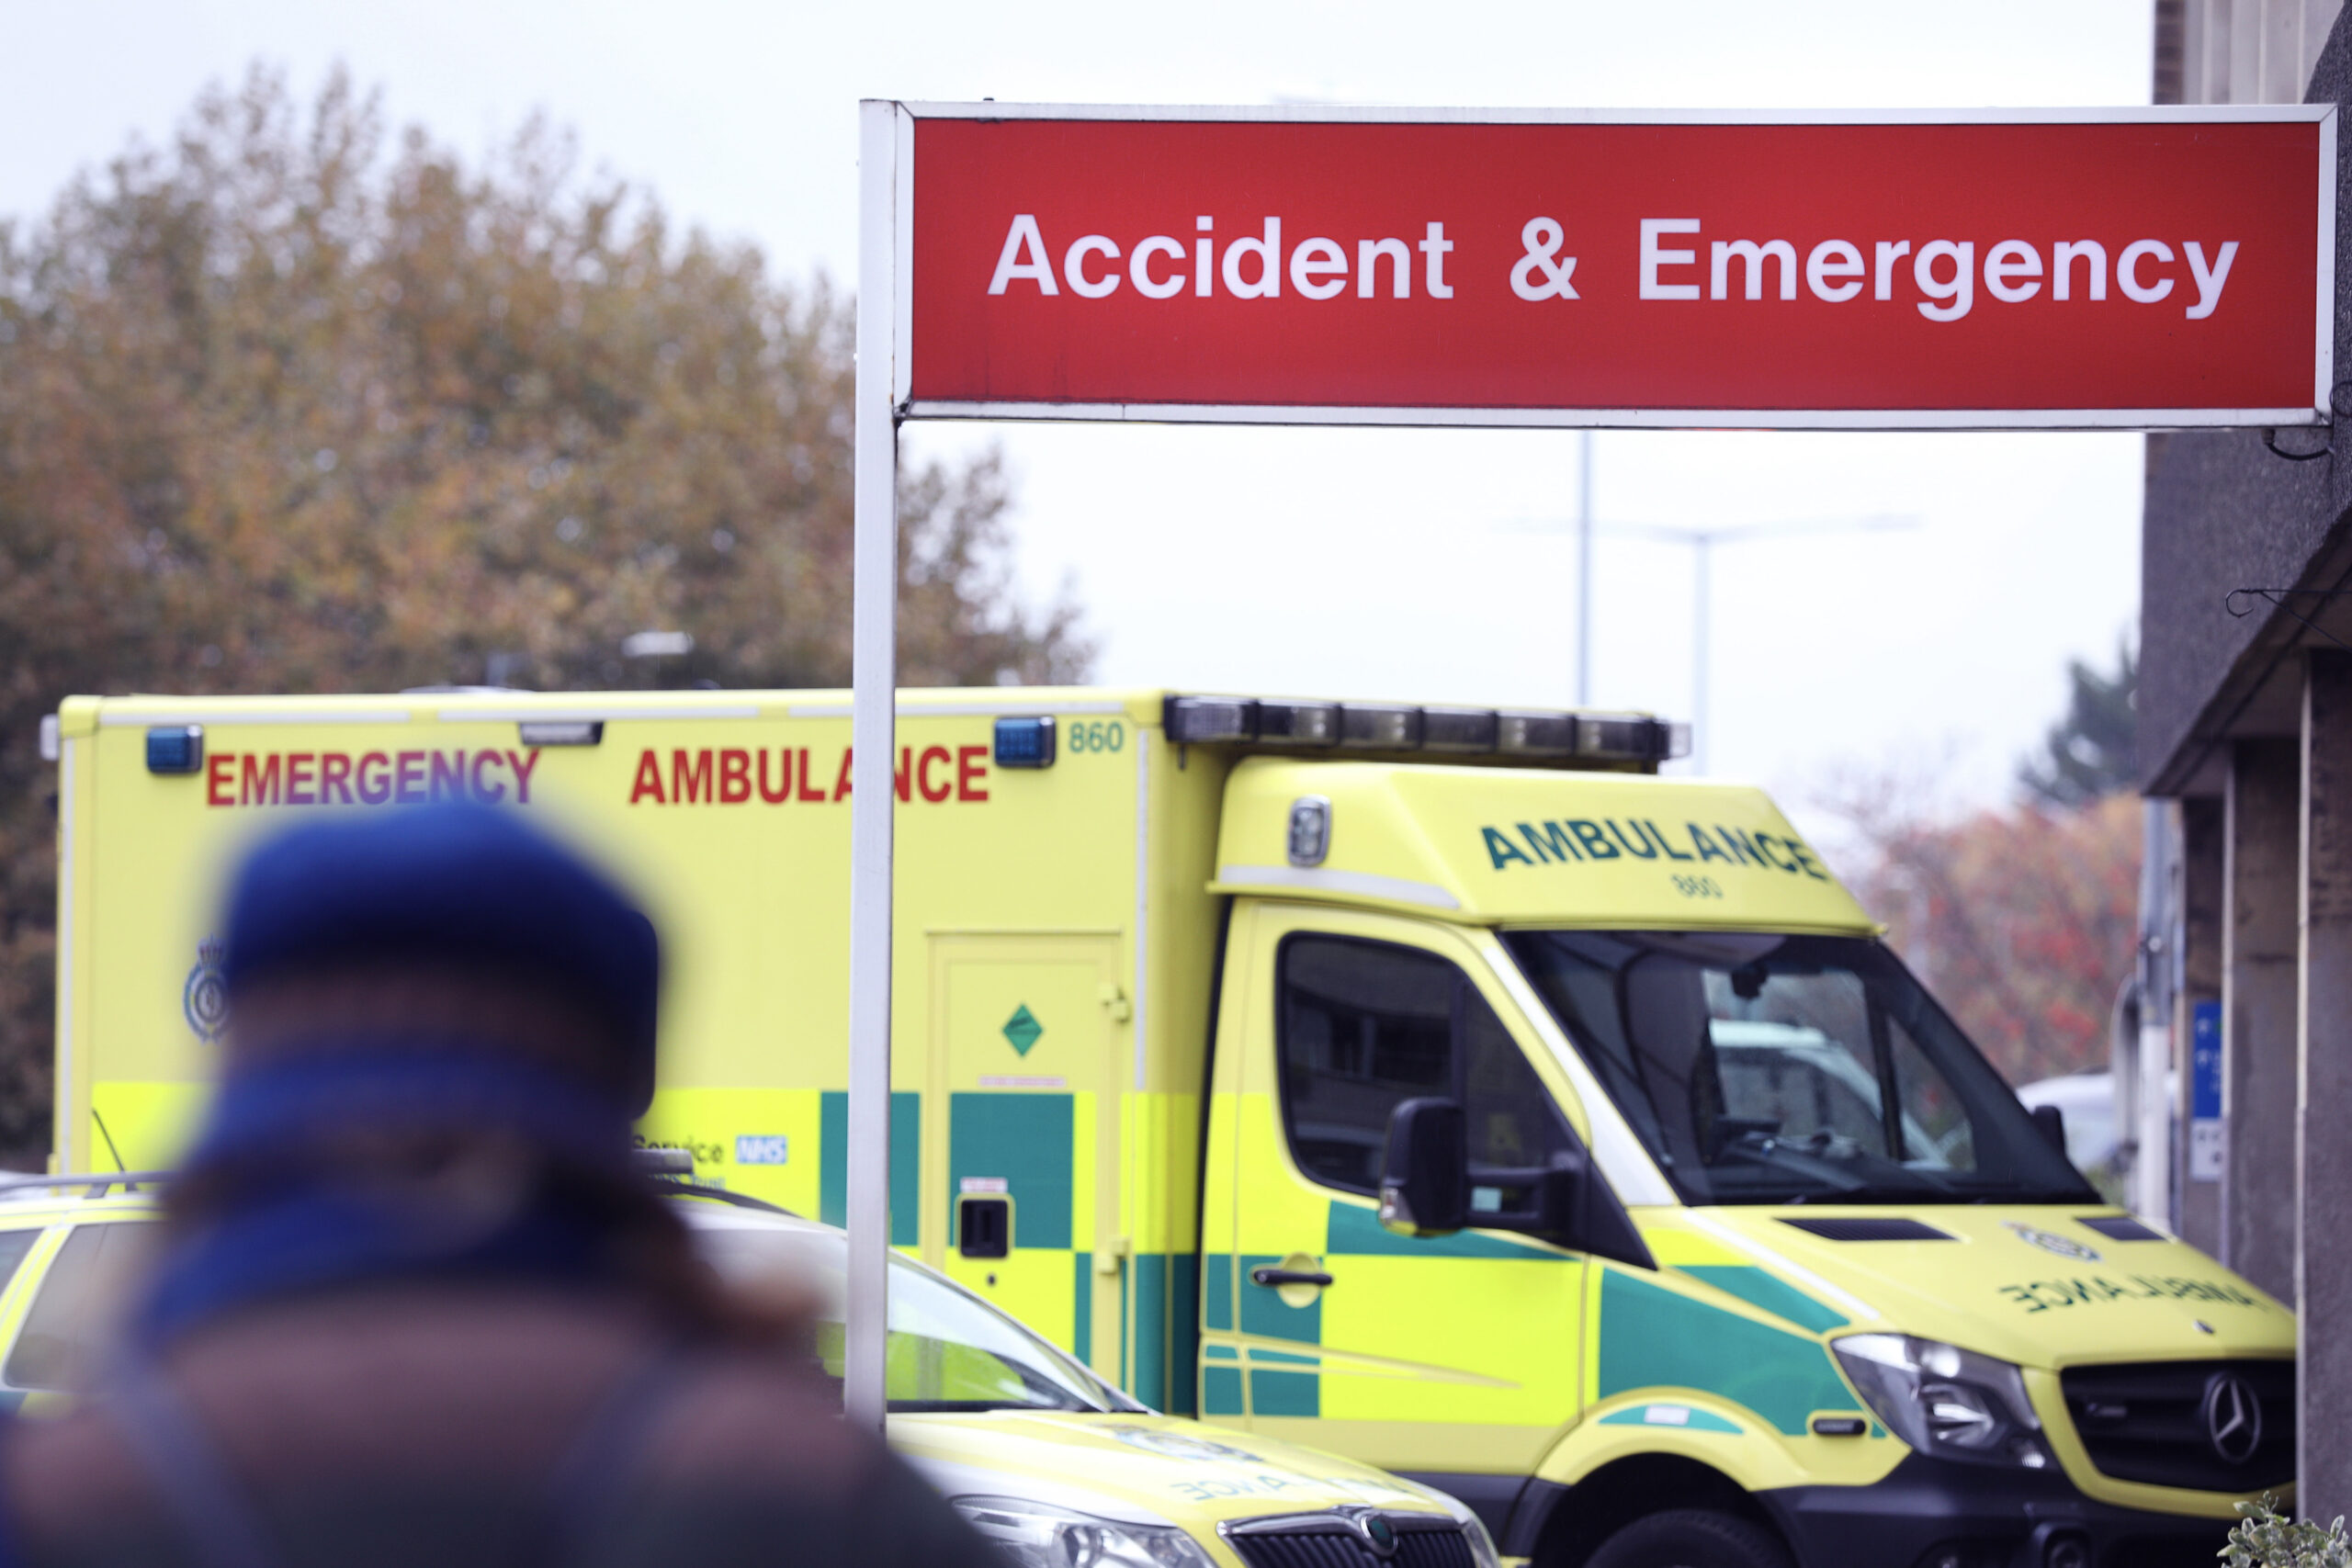 Picture of an ambulance and an Accident and Emergency sign